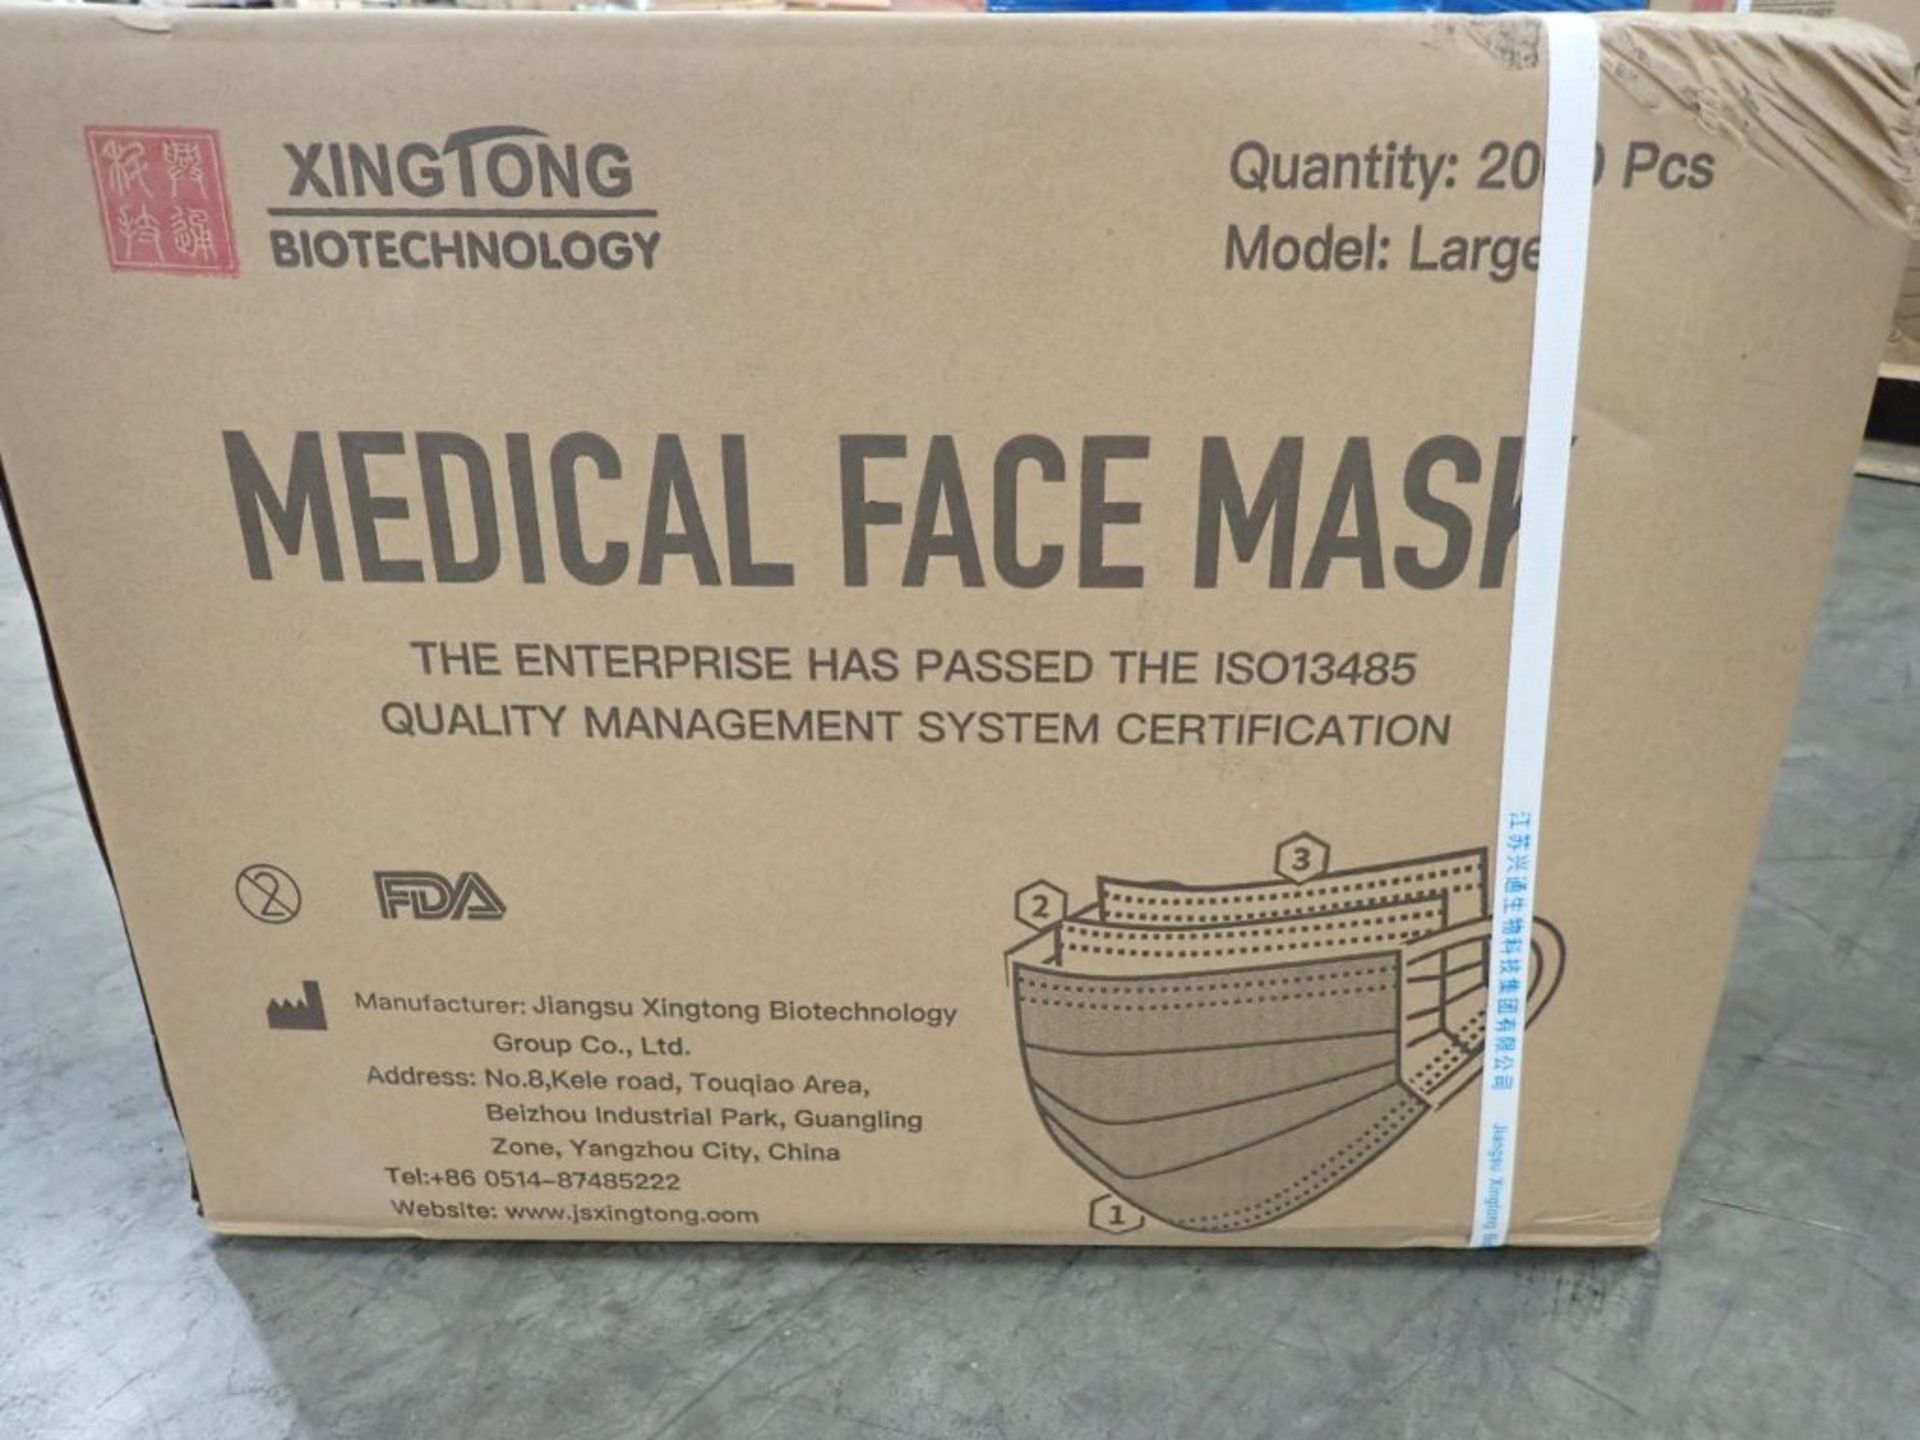 Lot of (60,000) Medical Face Mask - Image 4 of 5